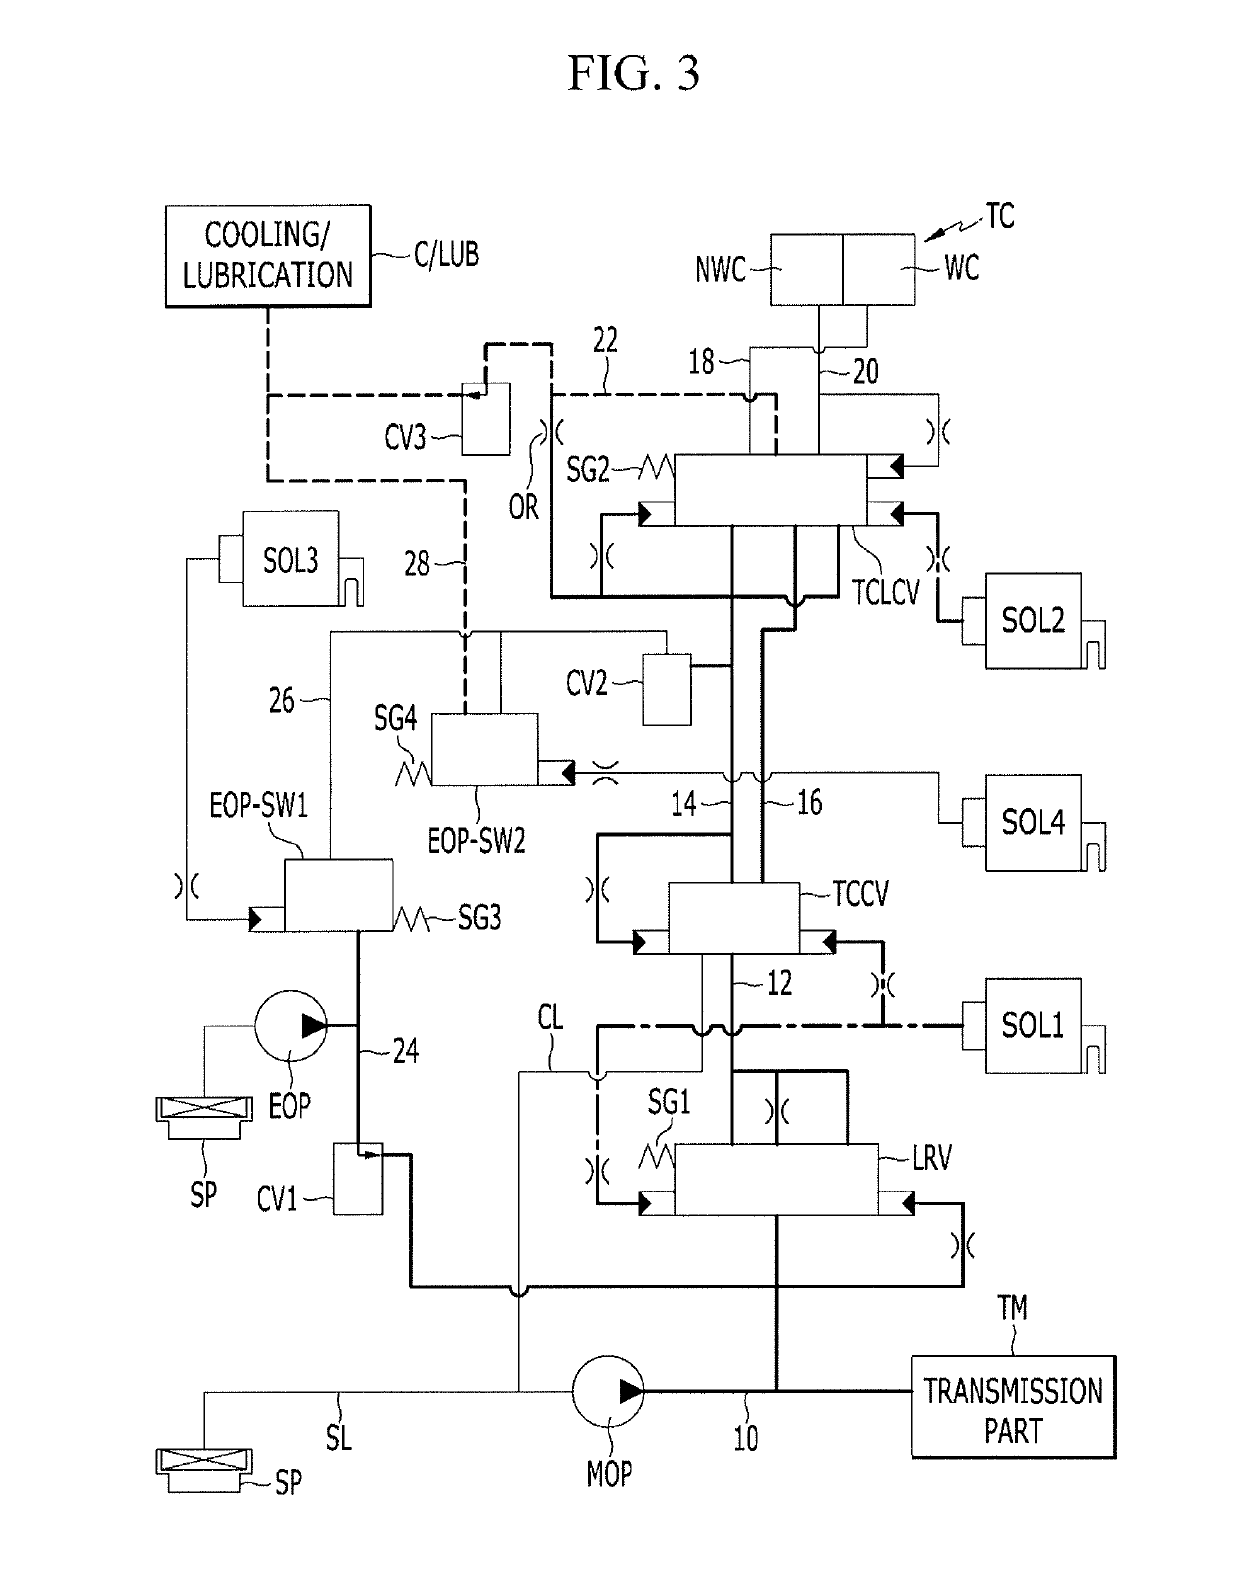 Oil pressure supply system of automatic transmission